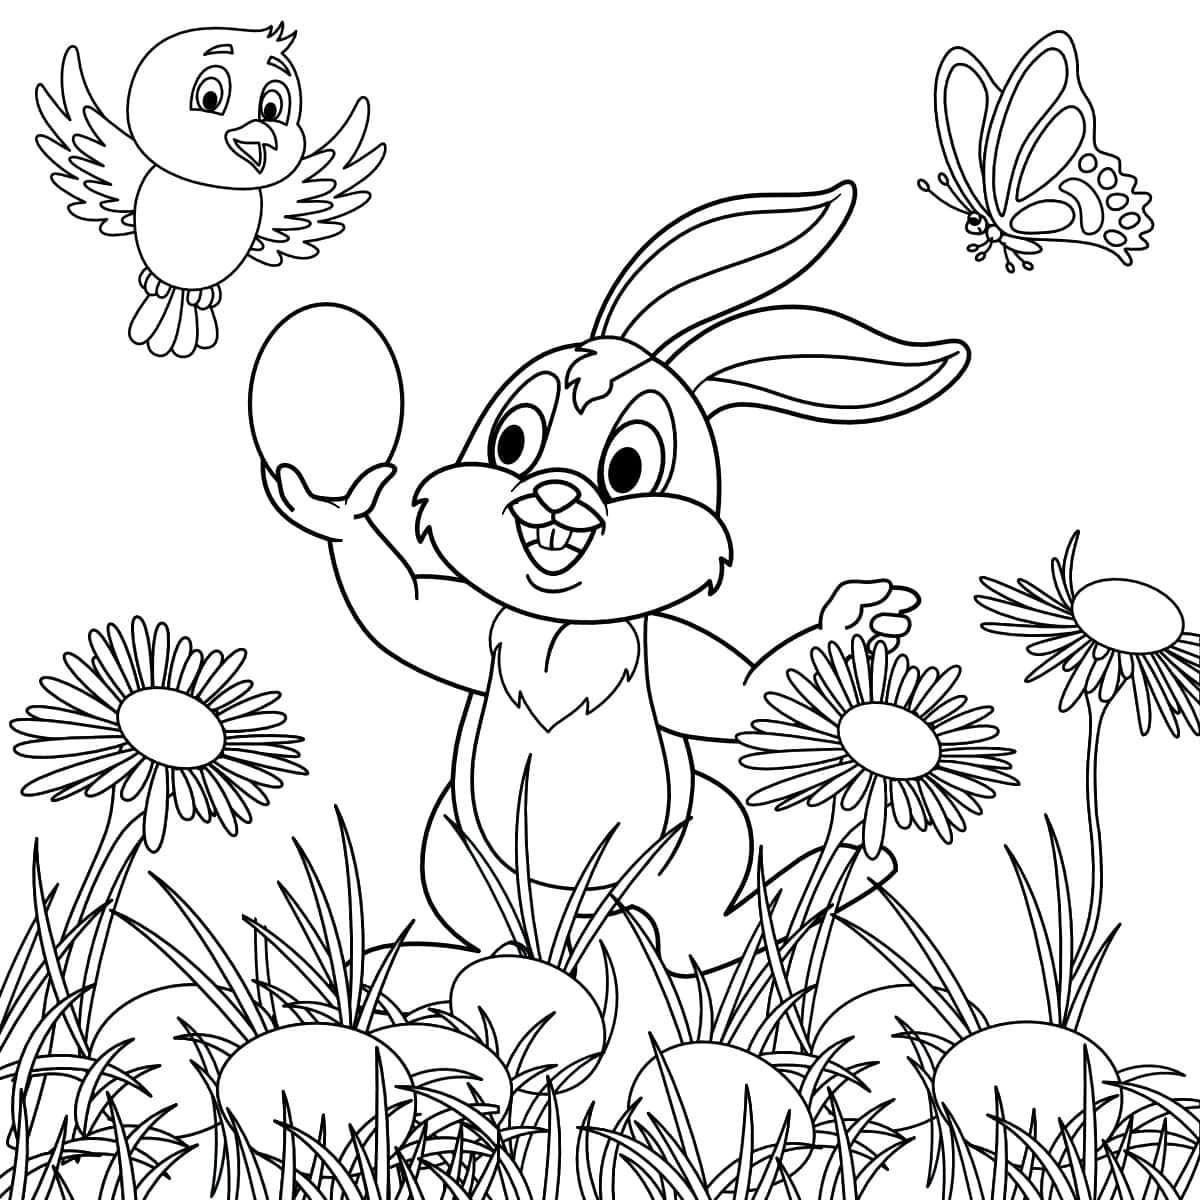 Bunny with egg Easter coloring page.